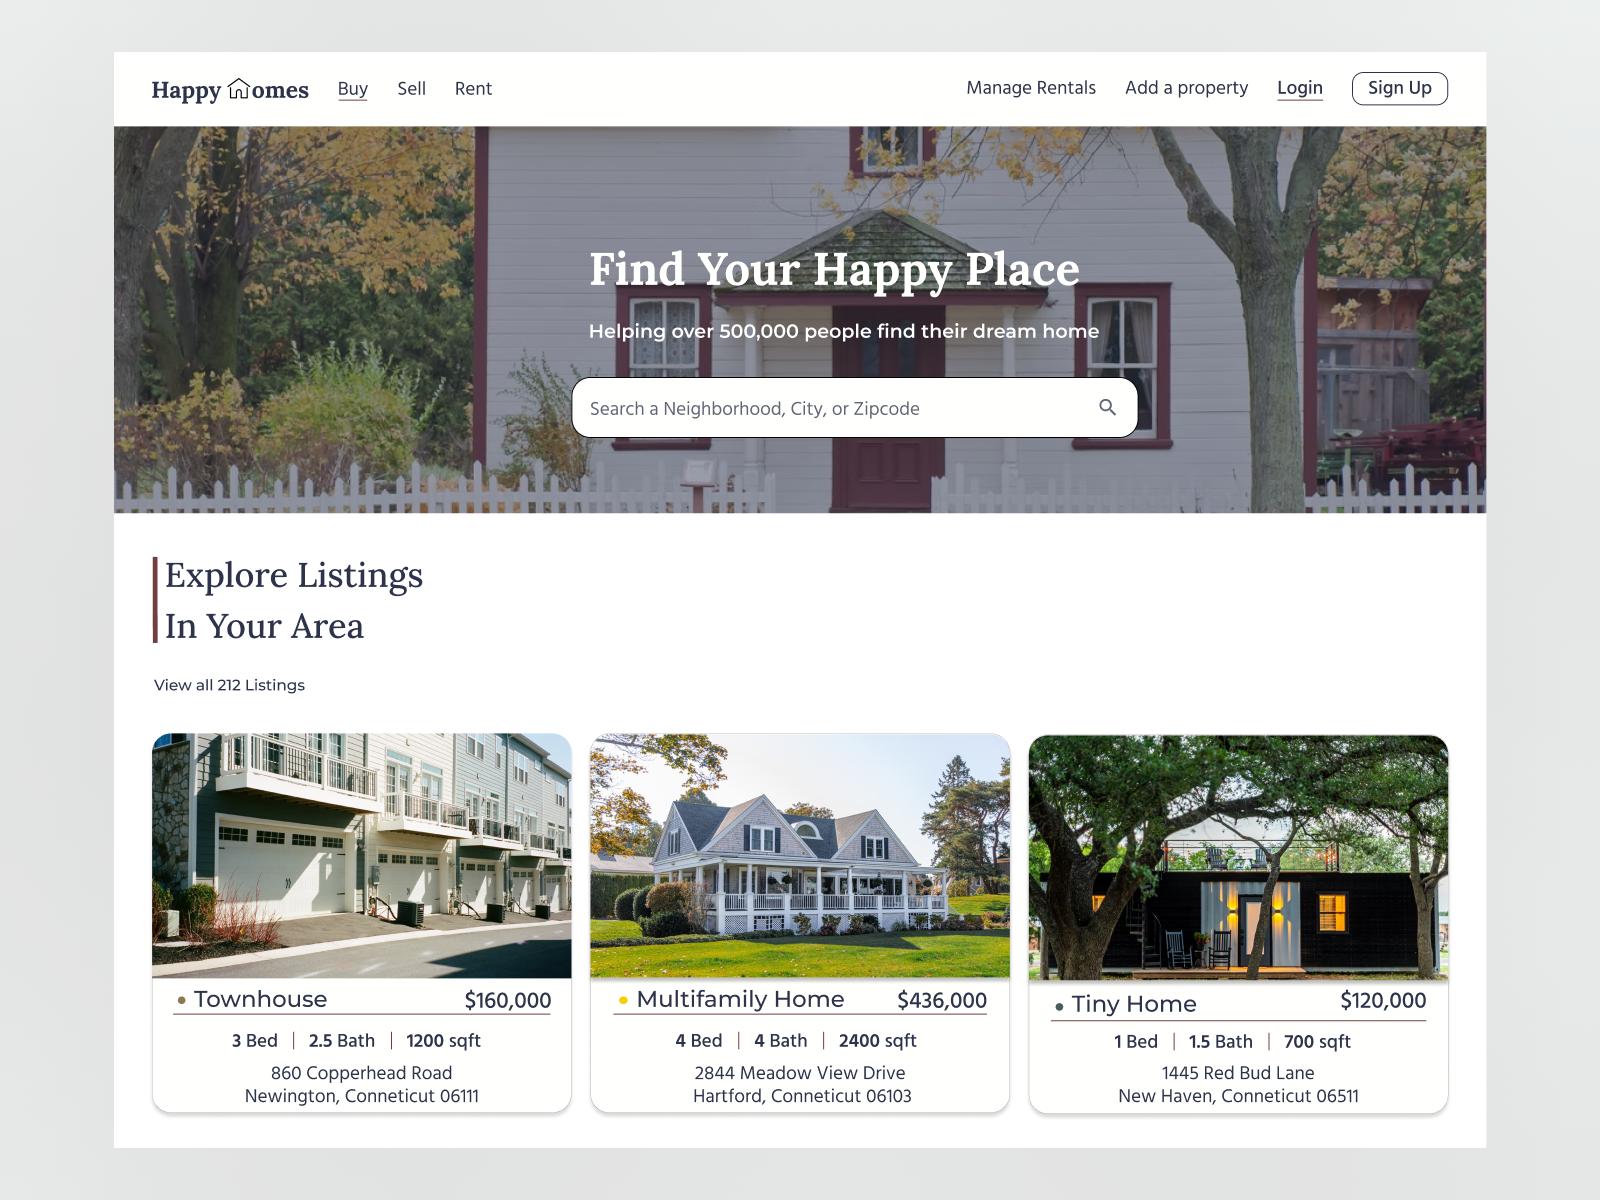 real-estate-website-landing-page-by-cynthia-menos-on-dribbble